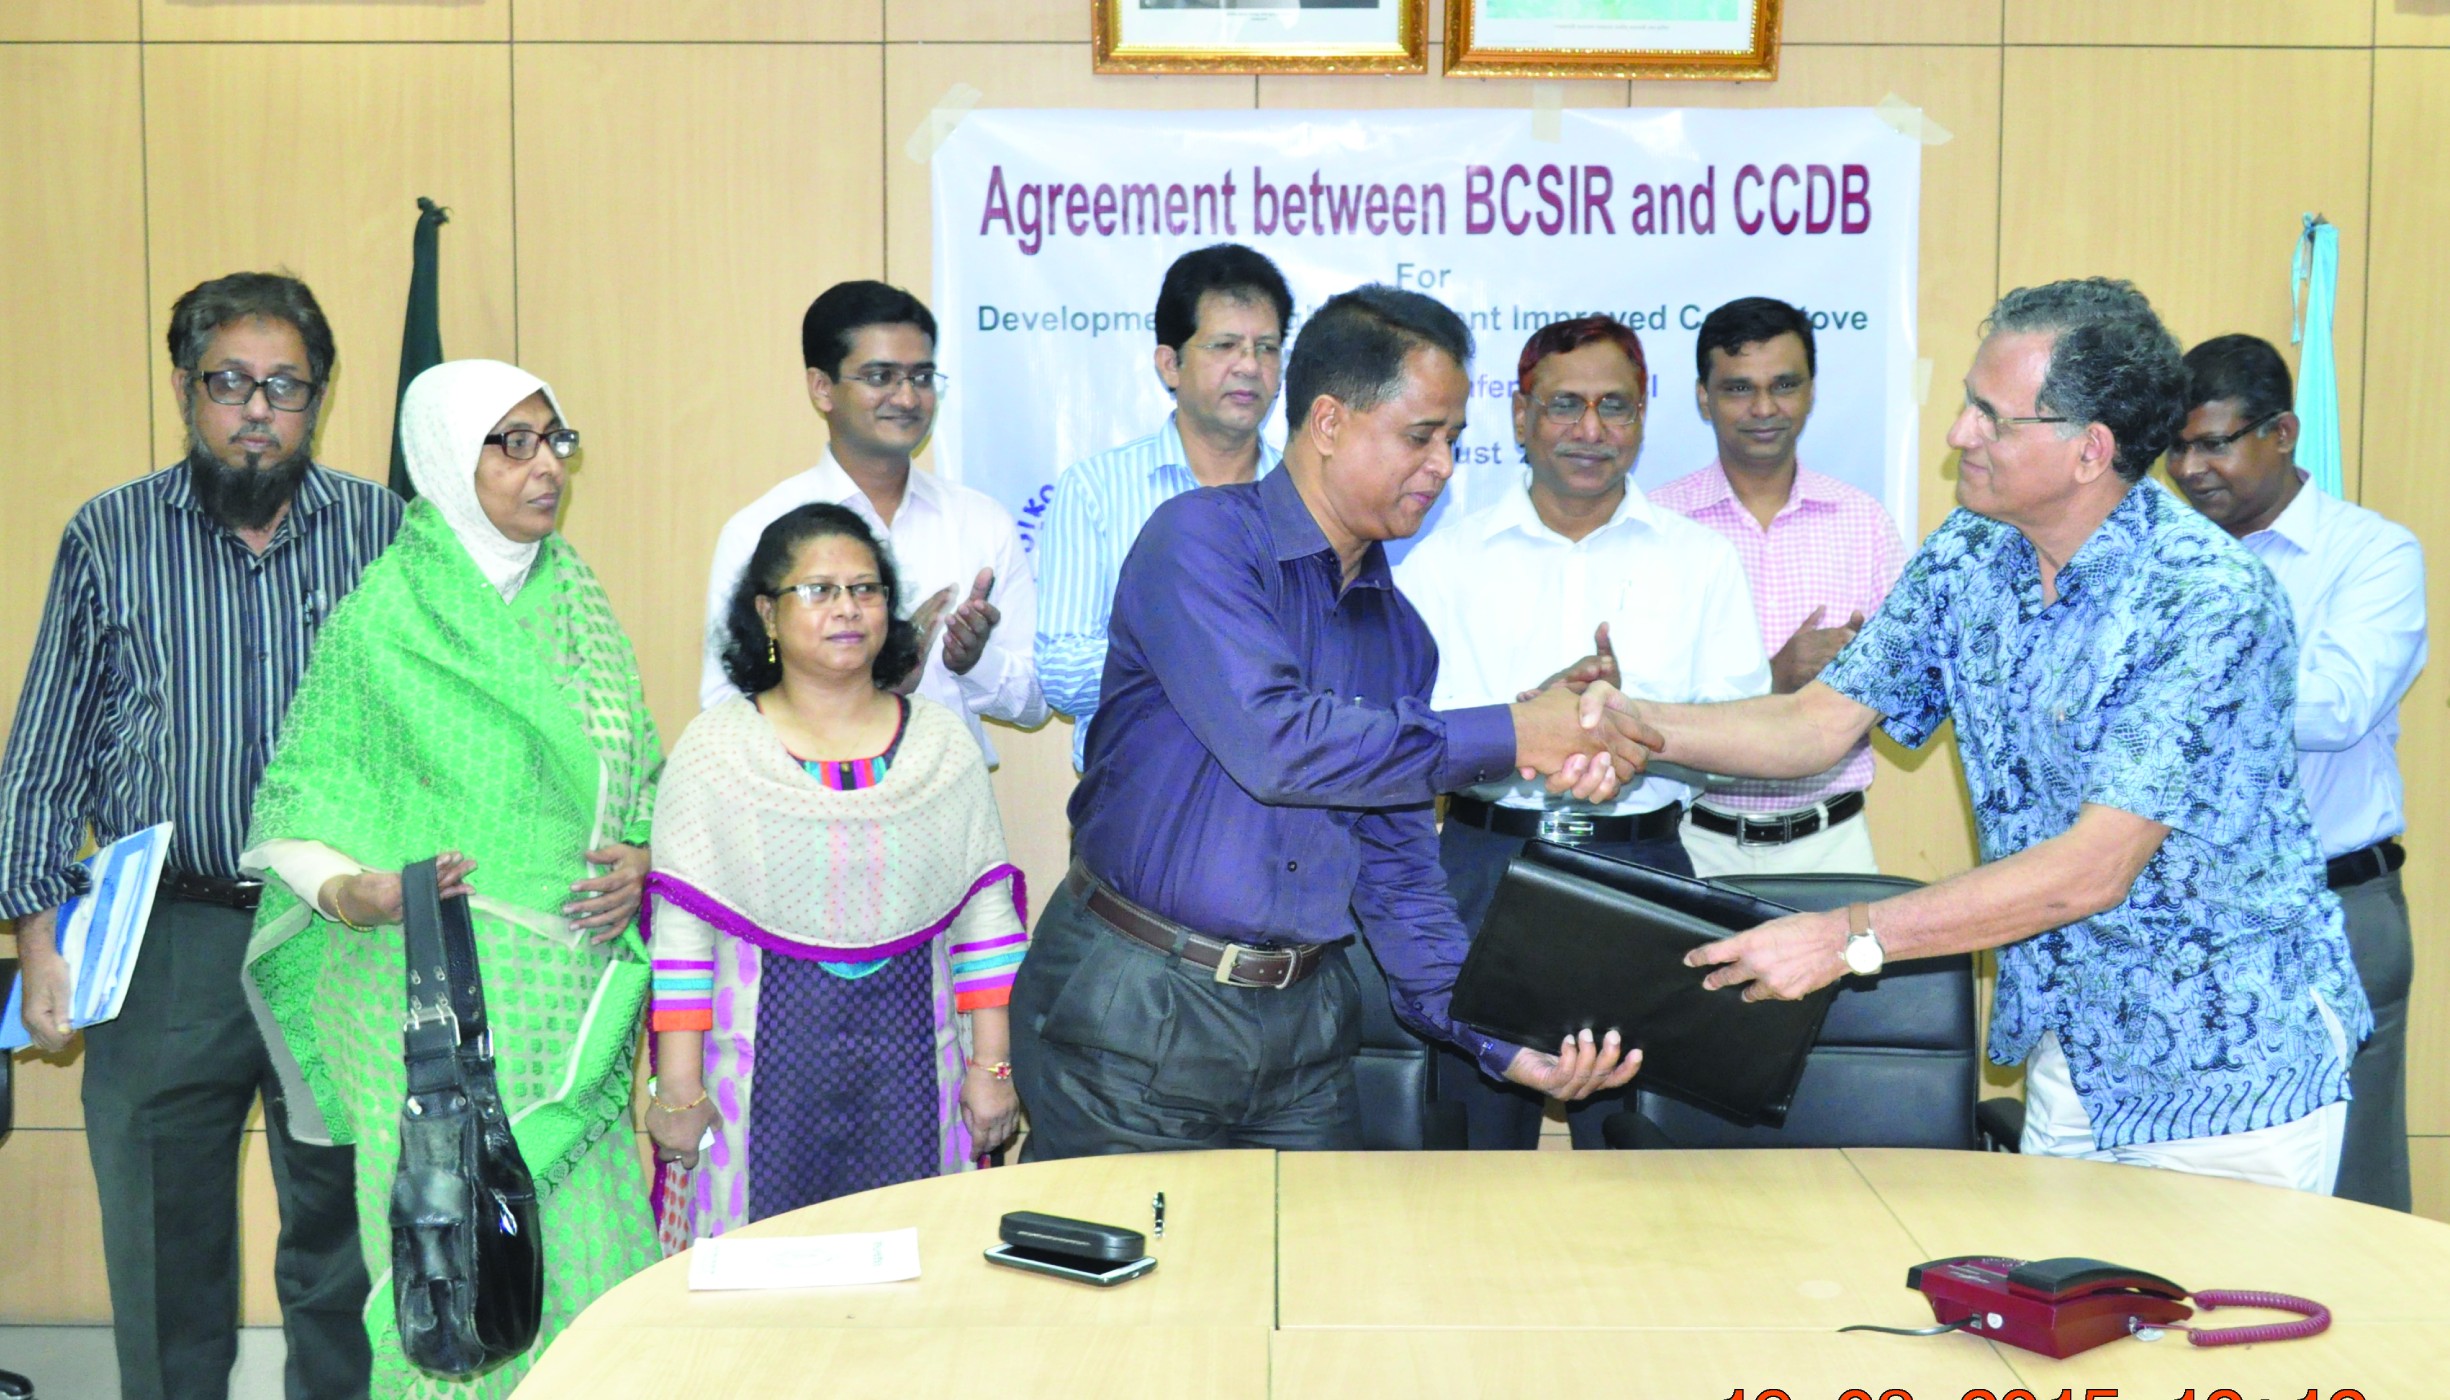 The Chairman is seen present on the occasion of agreement signing ceremony of BCSIR developed Cooking Stove between BCSIR and CCDB.